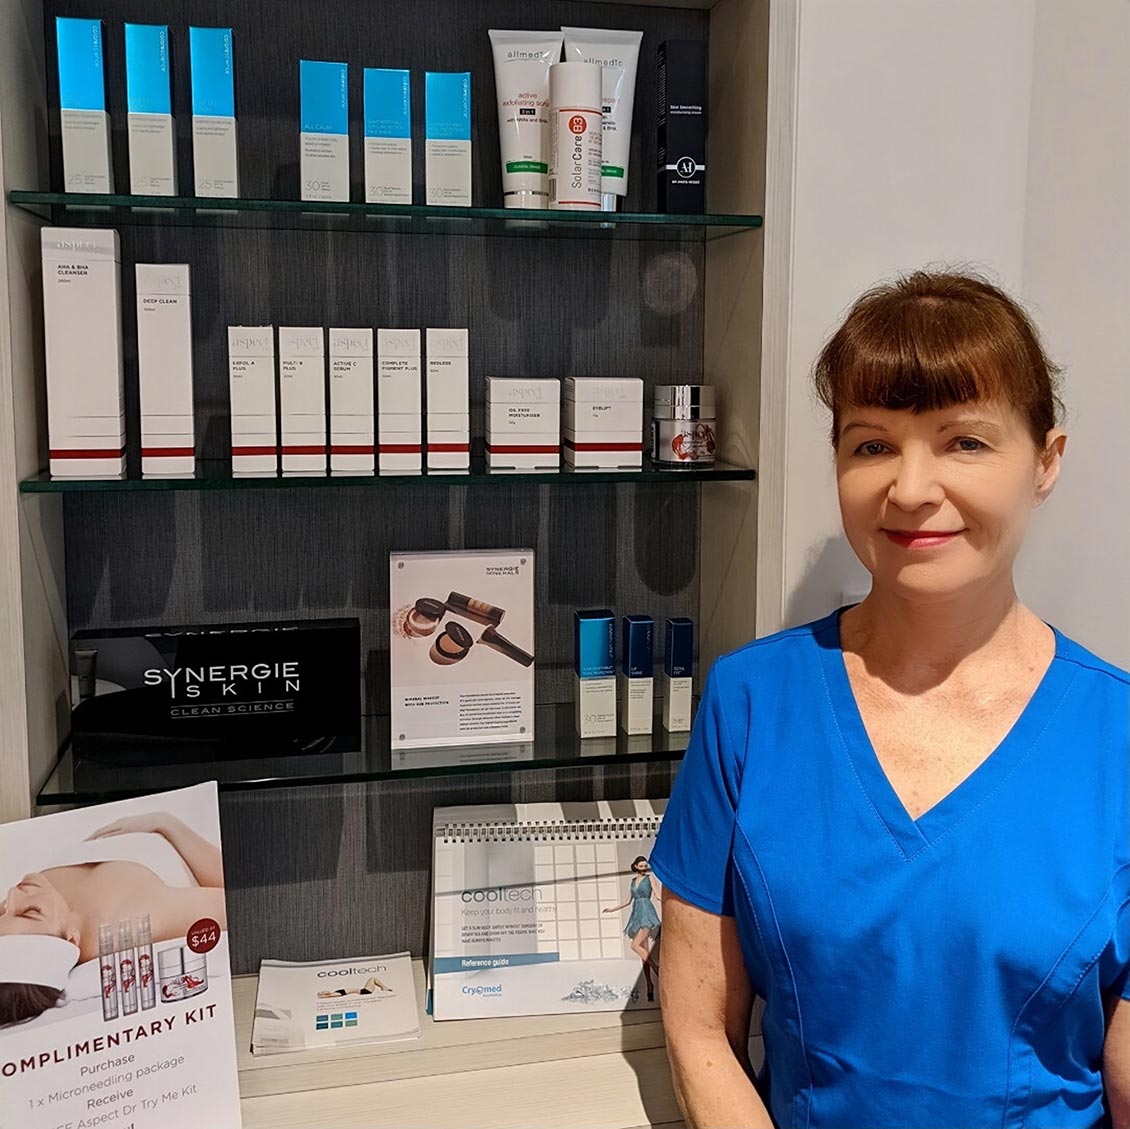 Dr Susan Austin with her clinic product display